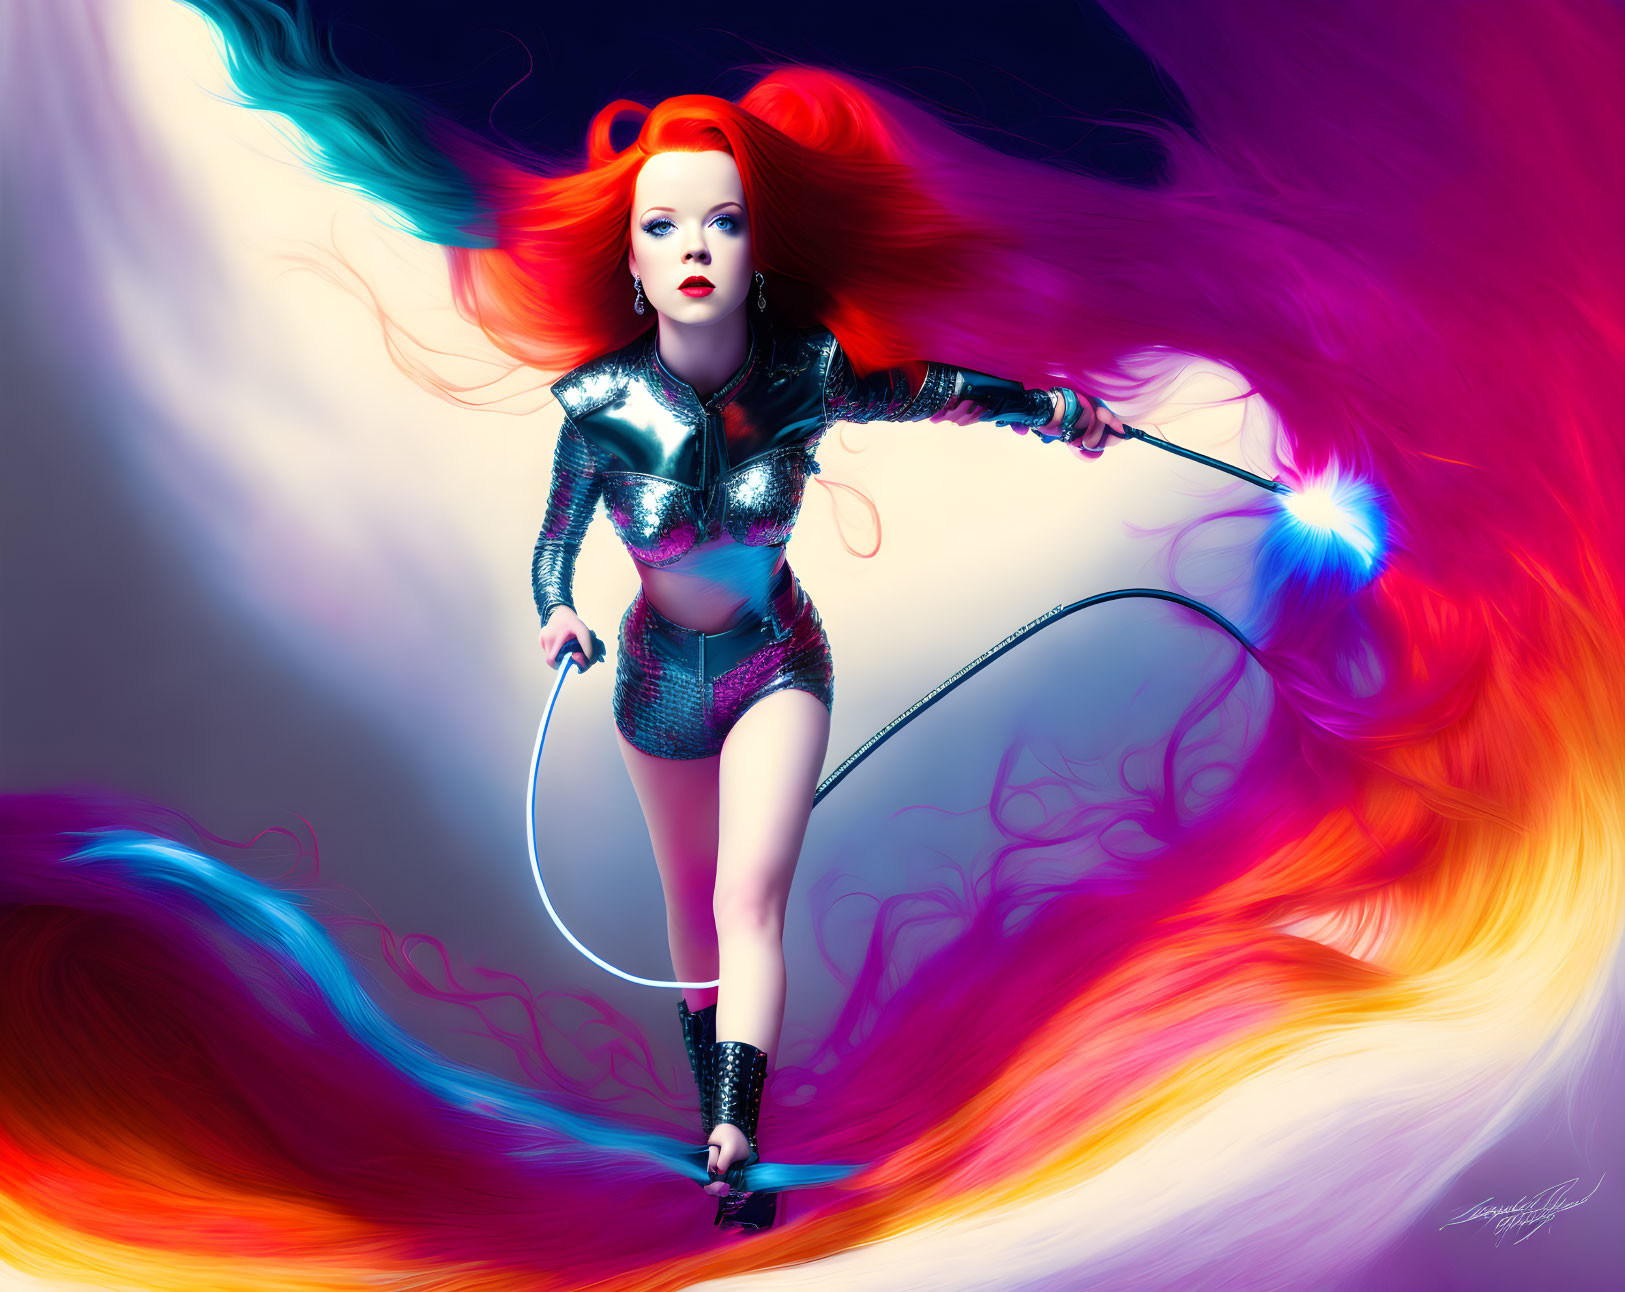 Futuristic woman with red hair in metallic outfit wields energy whip